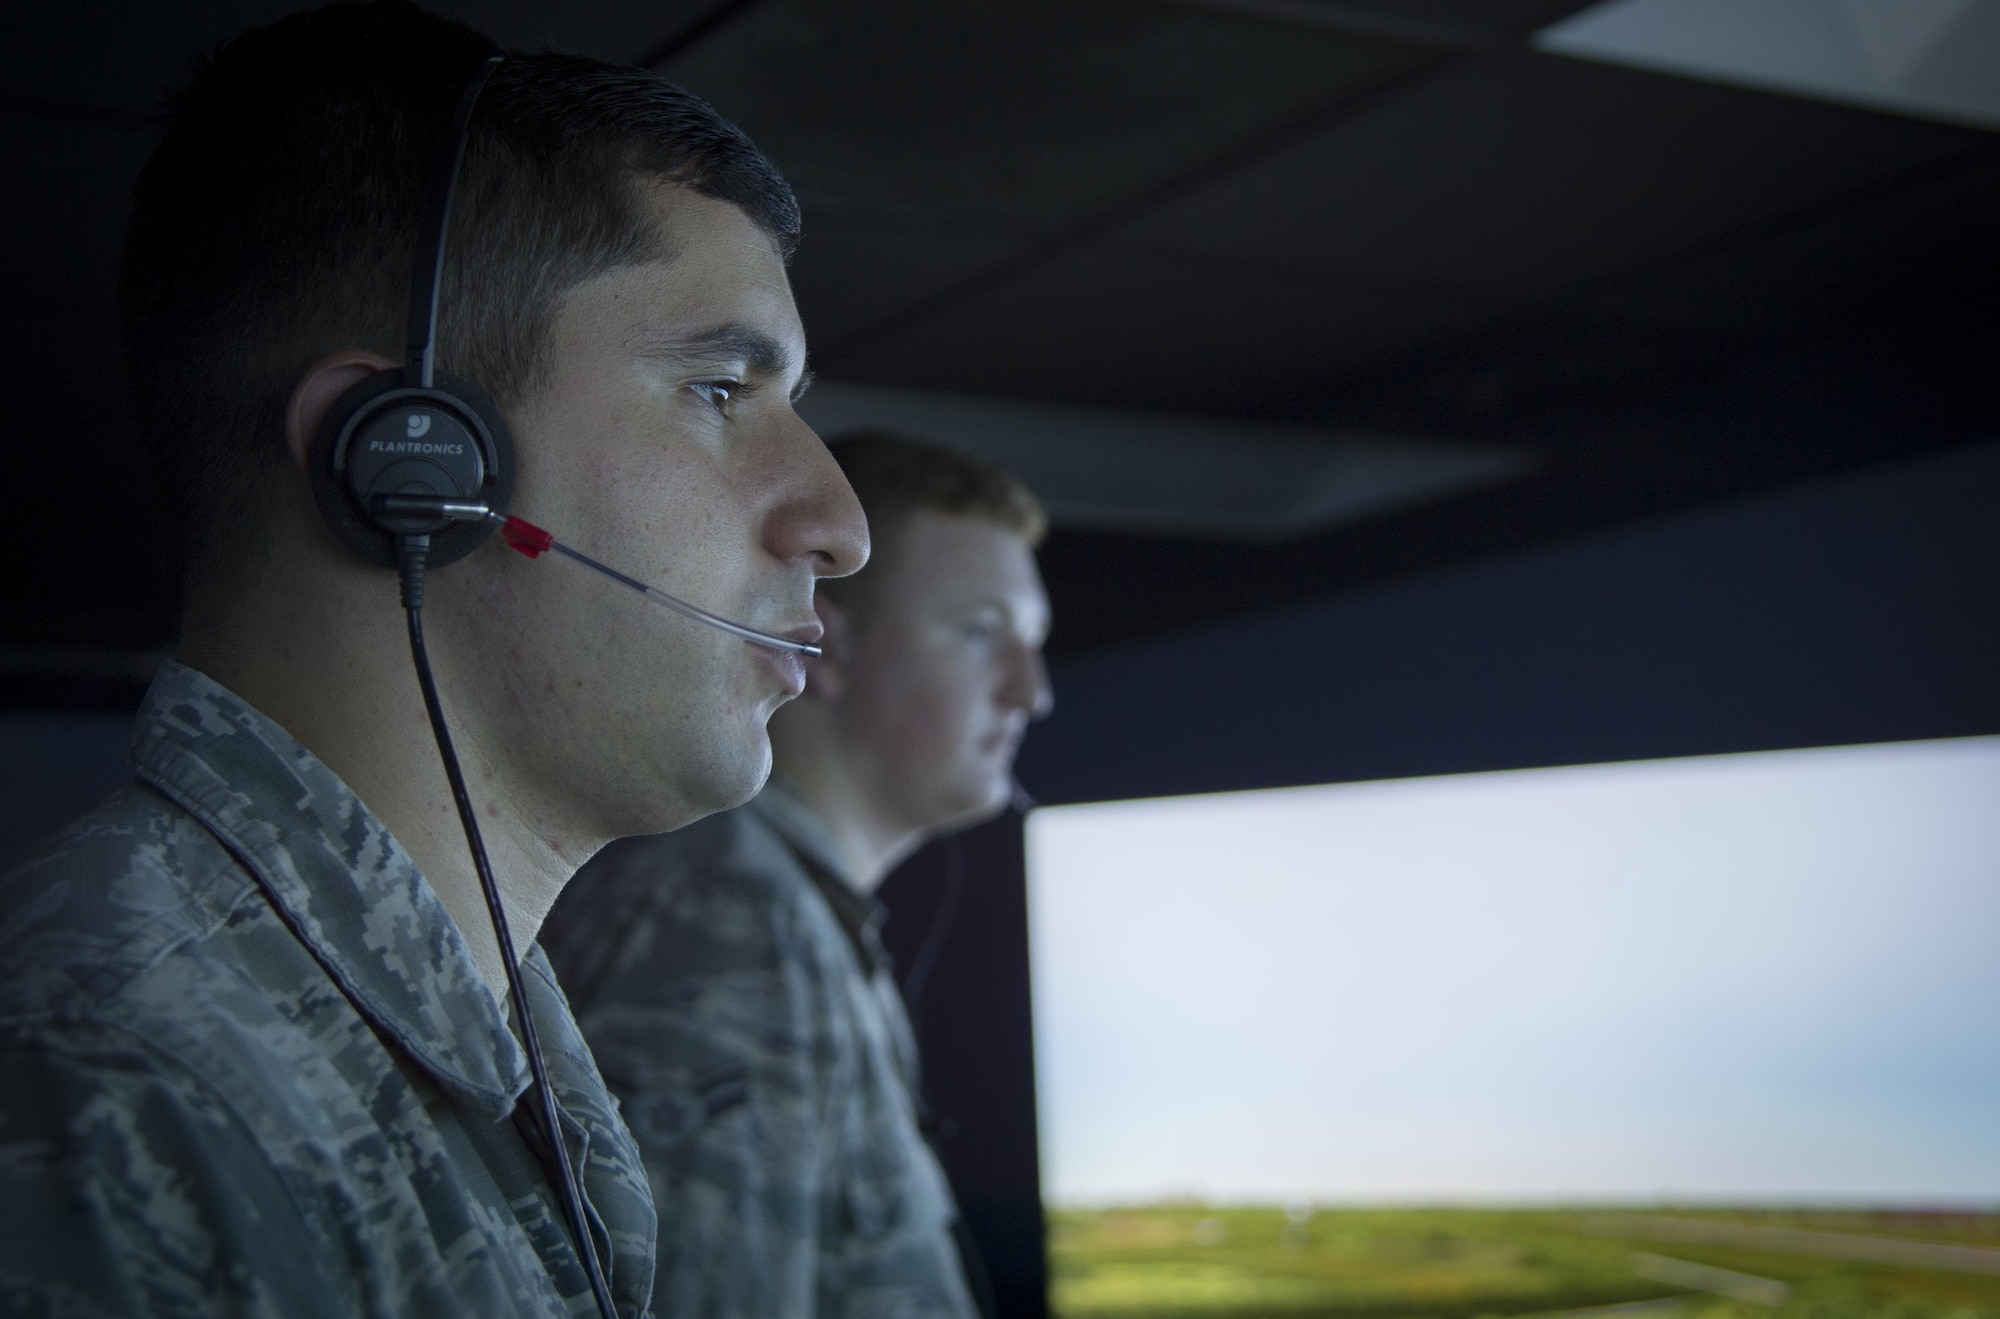 U.S. Air Force Senior Airman Vincent Magenti, an air traffic controller assigned to the 6th Operations Support Squadron, communicates to simulated pilots during an air traffic control simulator scenario at MacDill Air Force Base, Fla., Oct. 27, 2017. The simulator uses a replicated MacDill air field layout, voice recognition technology and customized scenarios to give controllers a realistic environments. (U.S. Air Force photo by Senior Airman Mariette Adams)